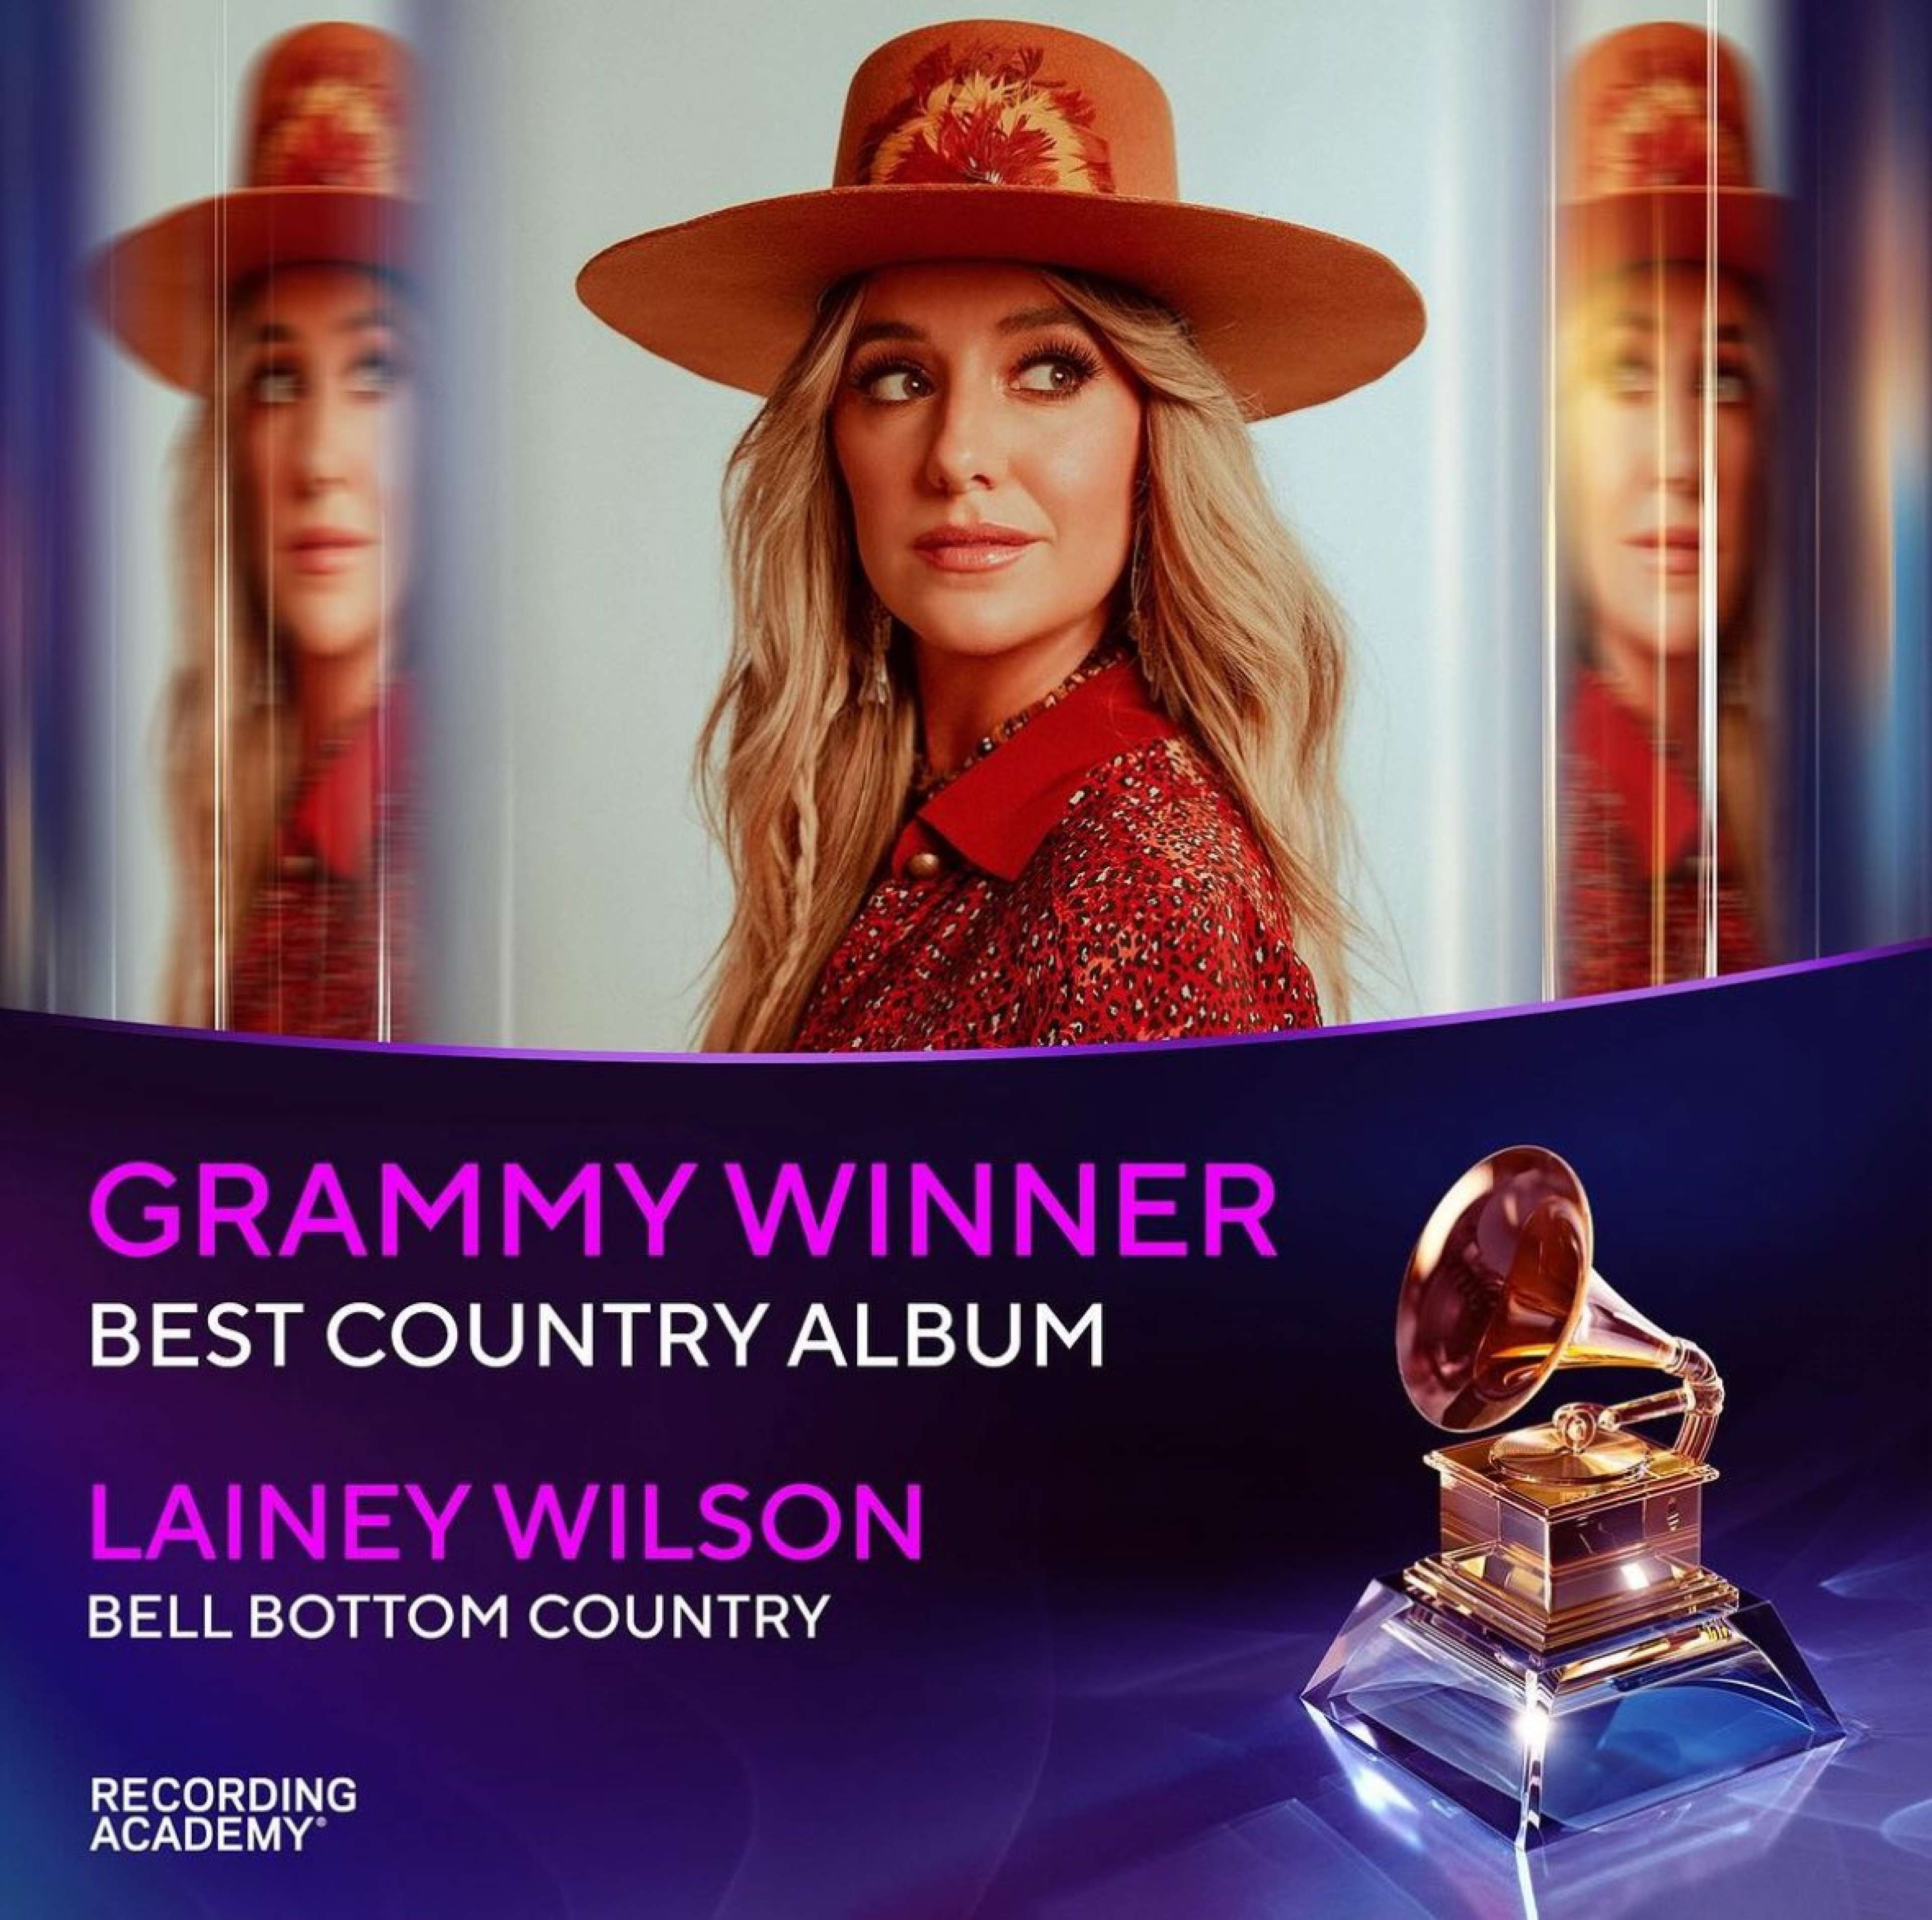 Lainey Wilson takes home her first Grammy for Best Country Album with - 